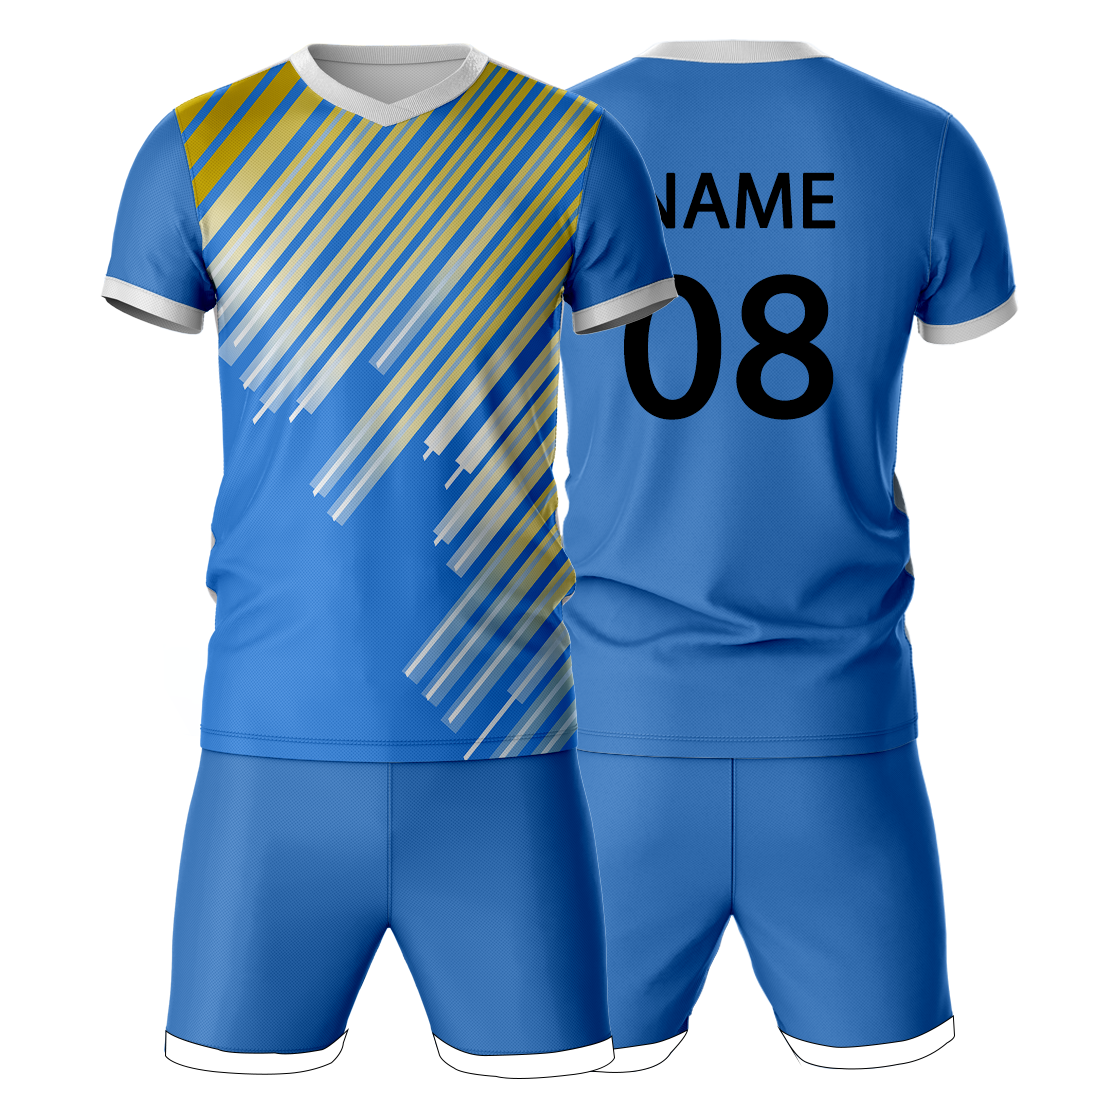 All Over Printed Jersey With Shorts Name & Number Printed.NP50000657